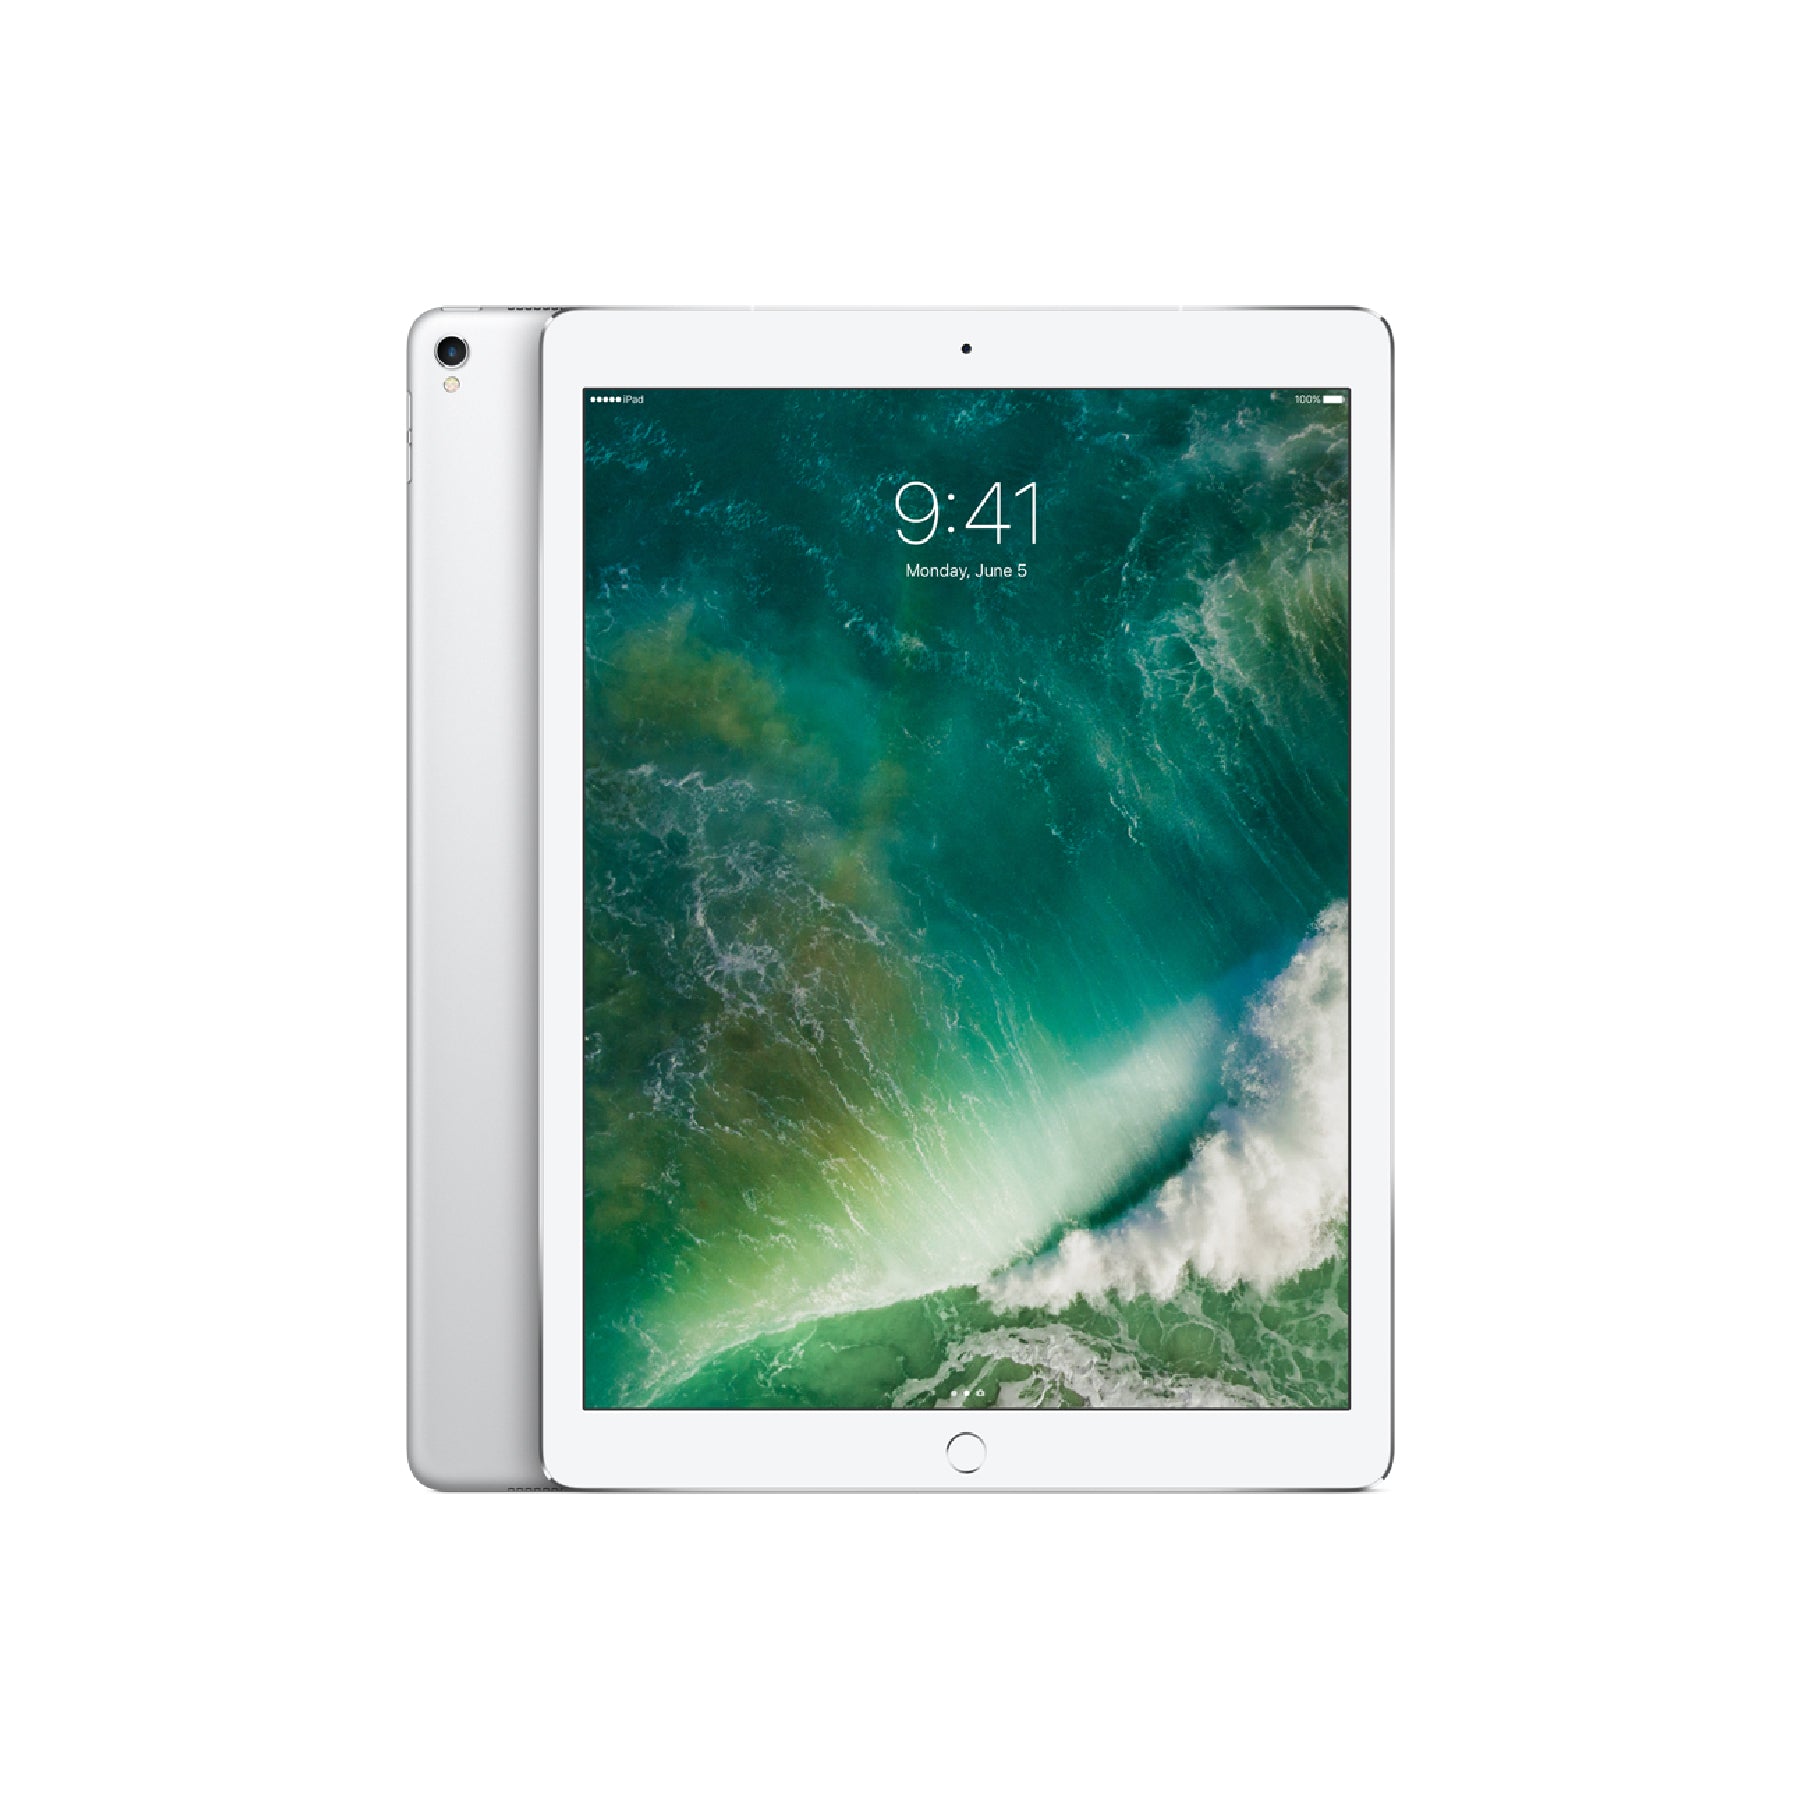 iPad Pro (12.9-inch, 2017, 2nd Generation) Wi-Fi 64GB - Silver (Better) - iStore Pre-owned